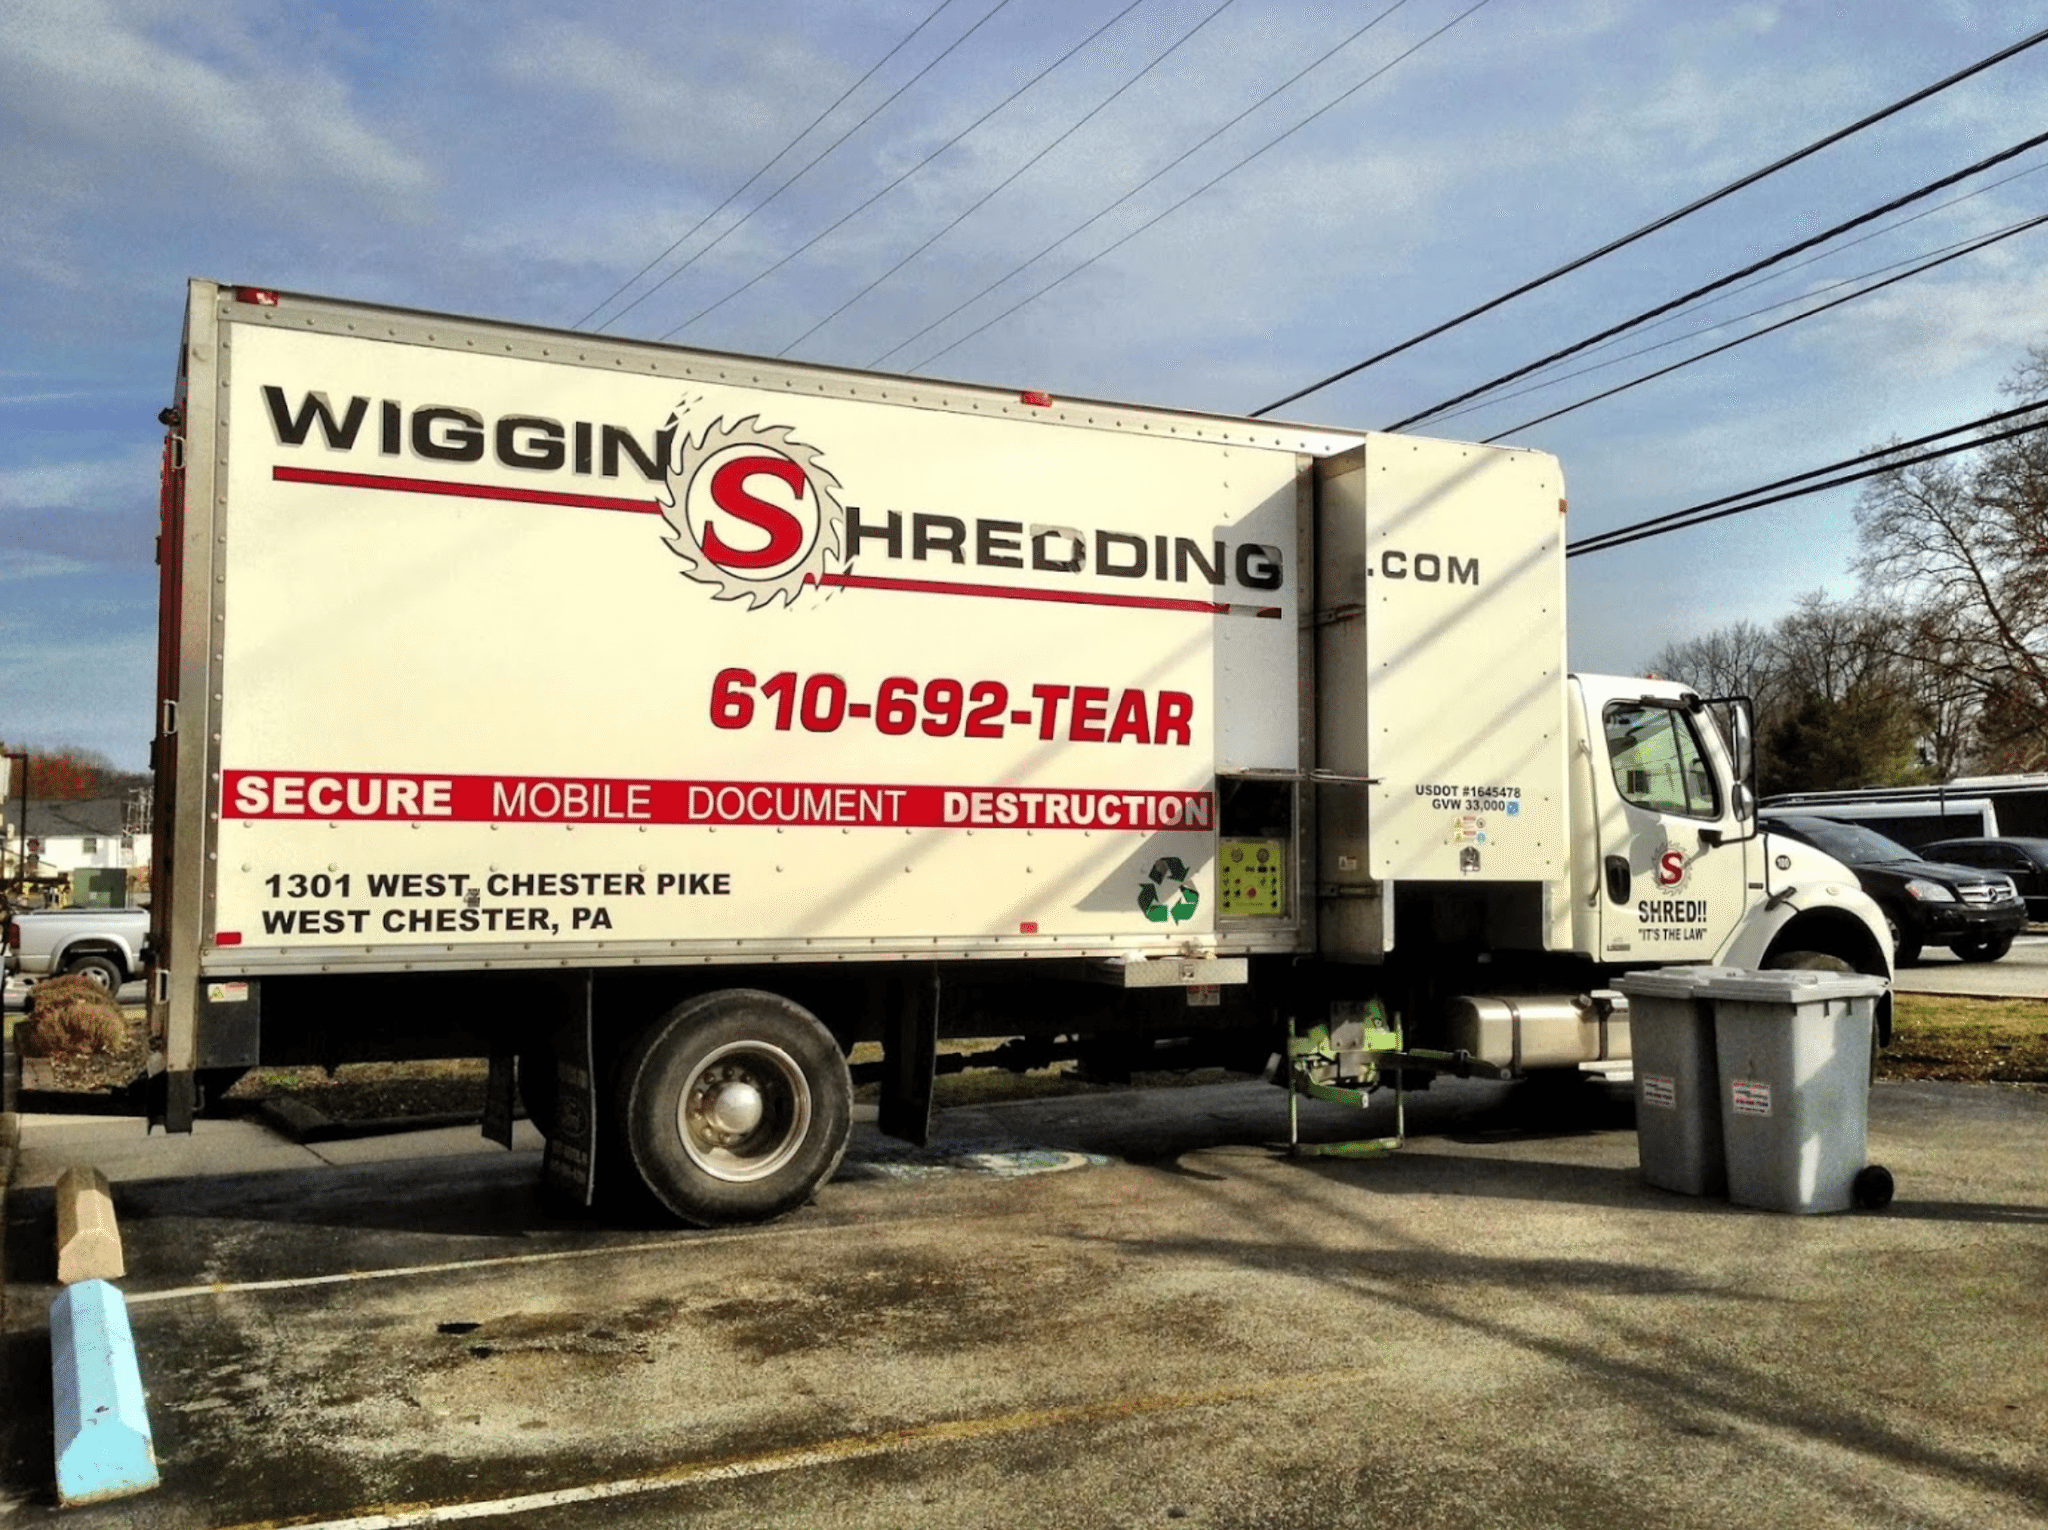 Wiggins shredding truck in parking lot with two secure collection containers beside